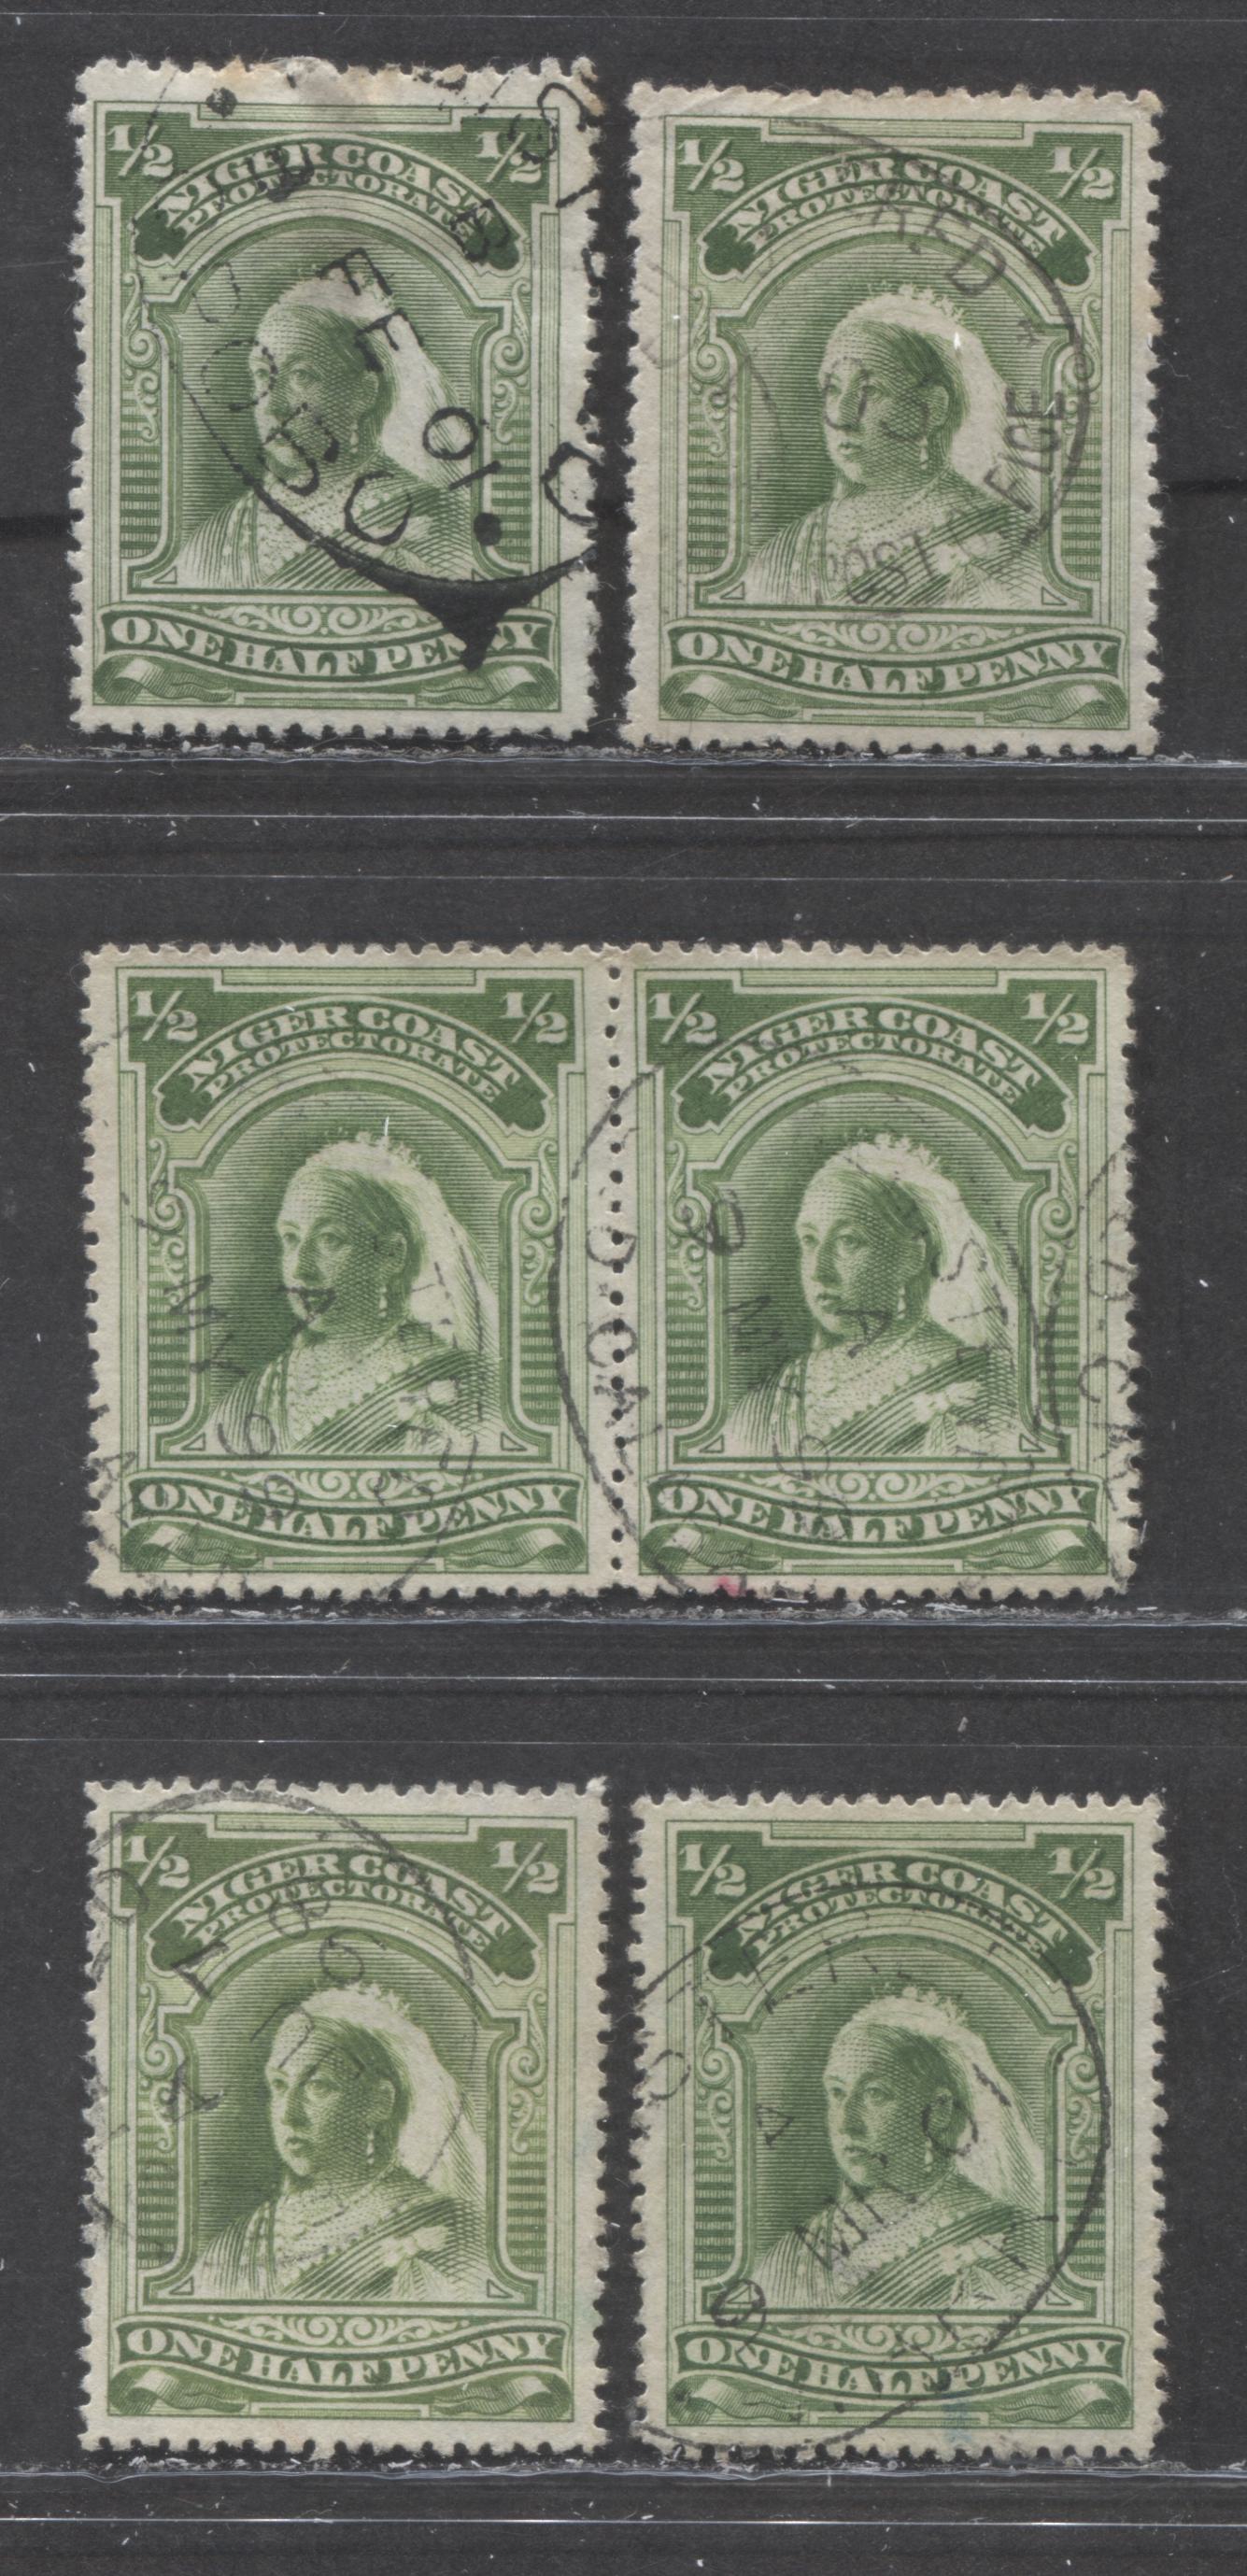 Lot 220 Niger Coast SC#55,55a(SG#66,66b) One Halfpenny Green, Yellow Green 1897 - 1898 Watermarked Issue, Perf 13.5 - 14, 14.5 - 15, A Fine - Very Fine Used Example, Click on Listing to See ALL Pictures, 2022 Scott Classic Cat. $10.5 USD